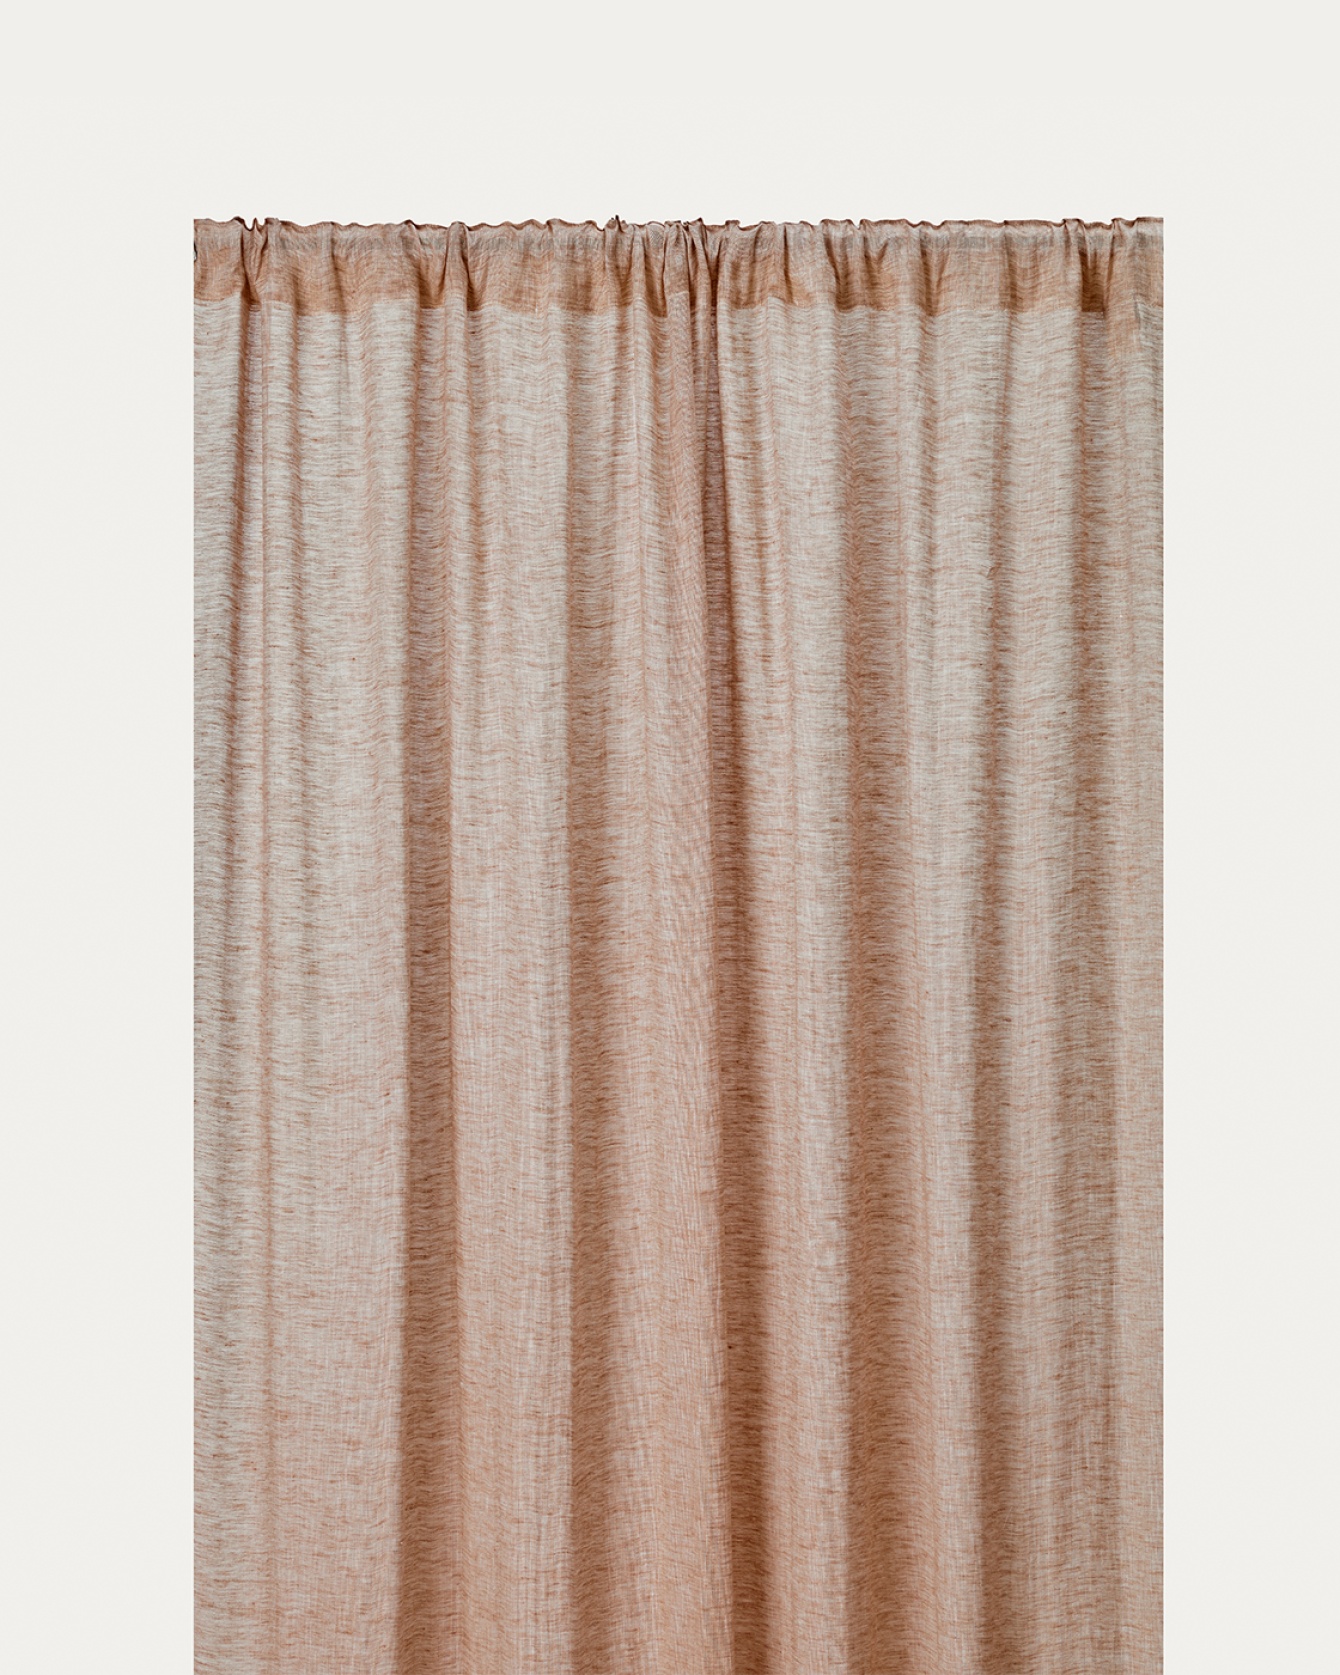 Product image camel brown INTERMEZZO curtain of sheer linen with finished pleat tape from LINUM DESIGN. Size 140x290 cm and sold in 2-pack.